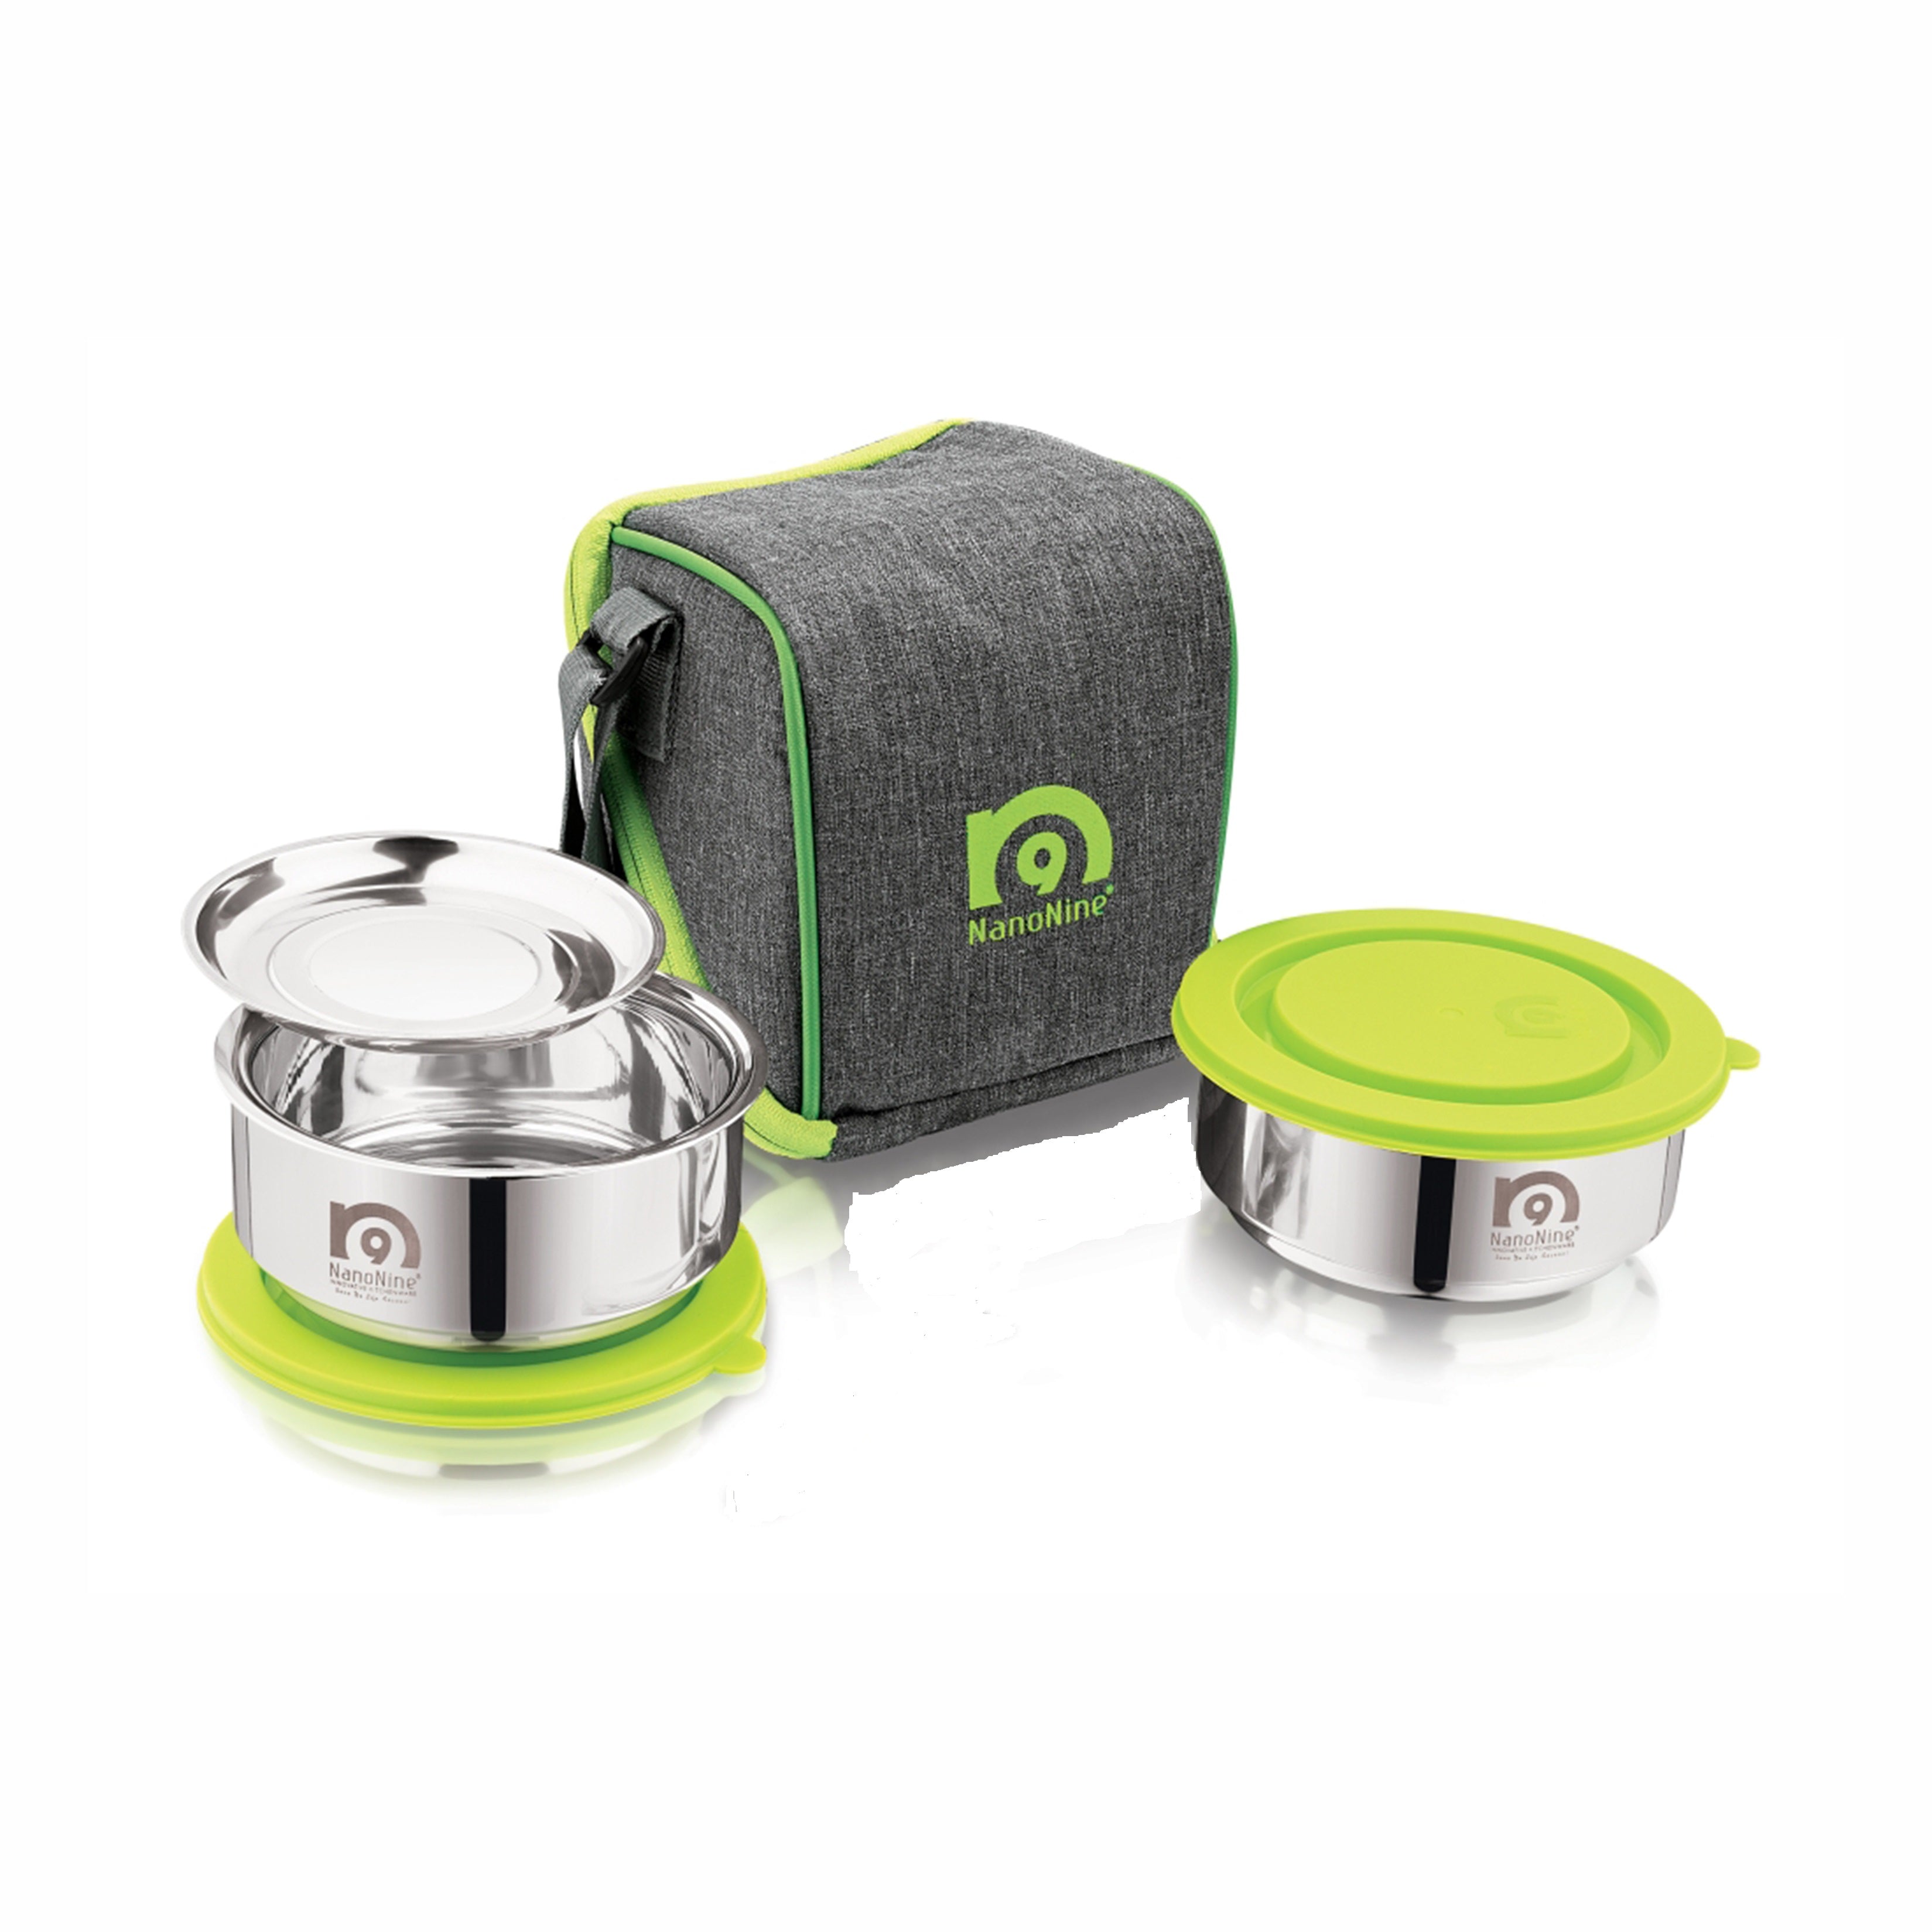 NanoNine Tiffiny Small Pro 375 ml X 2 Double Wall Insulated Stainless Steel Lunch Box.